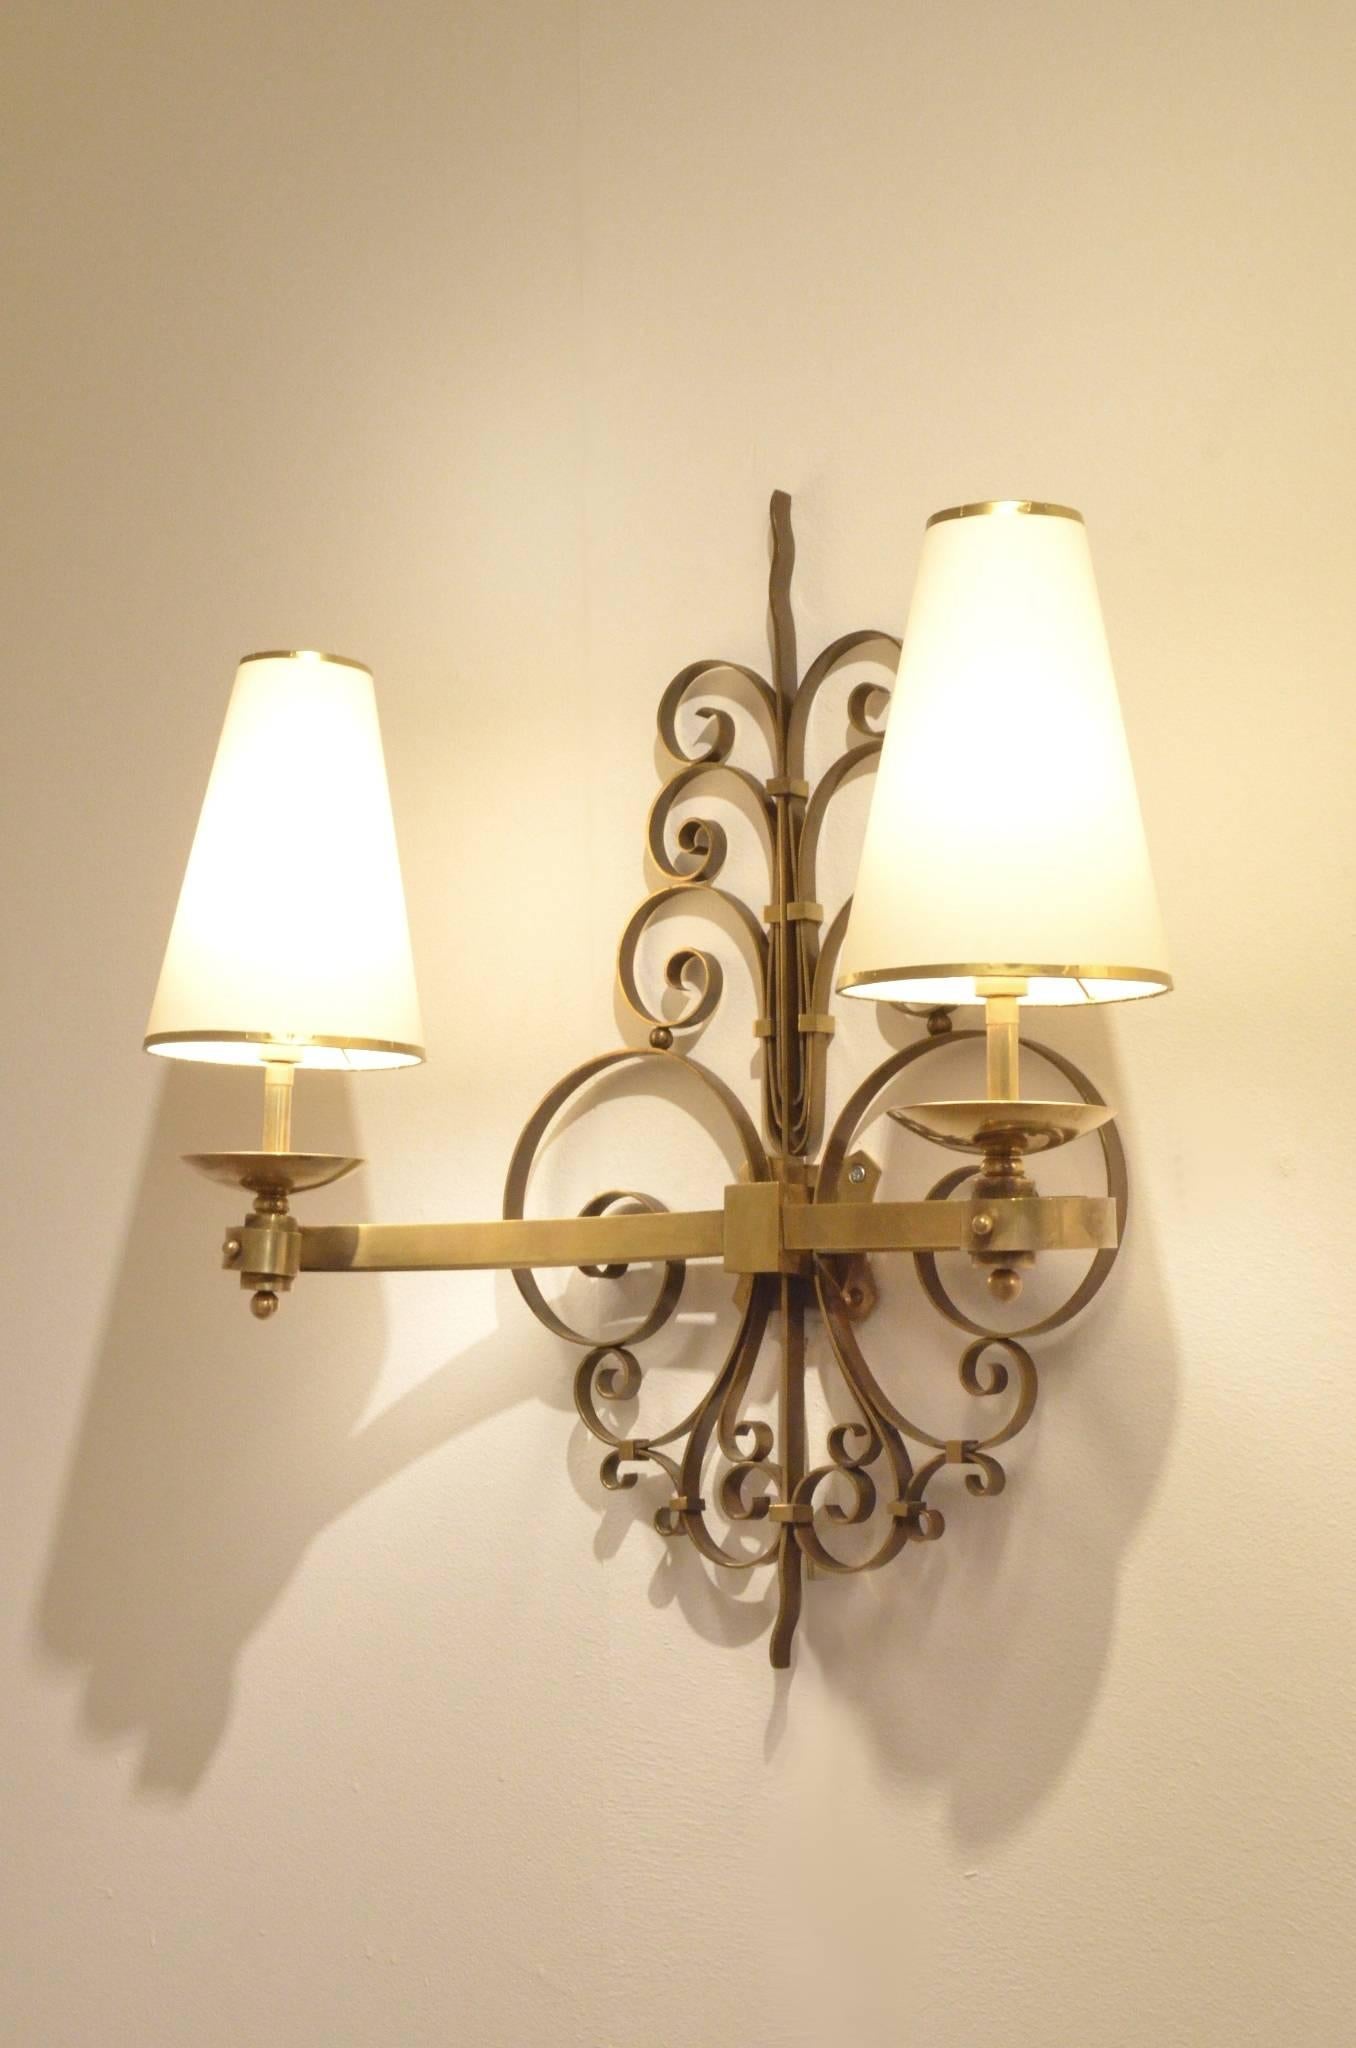 Three Art Deco René Drouet Style Sculptural Full Brass Wall Sconces Lamps, Set For Sale 2